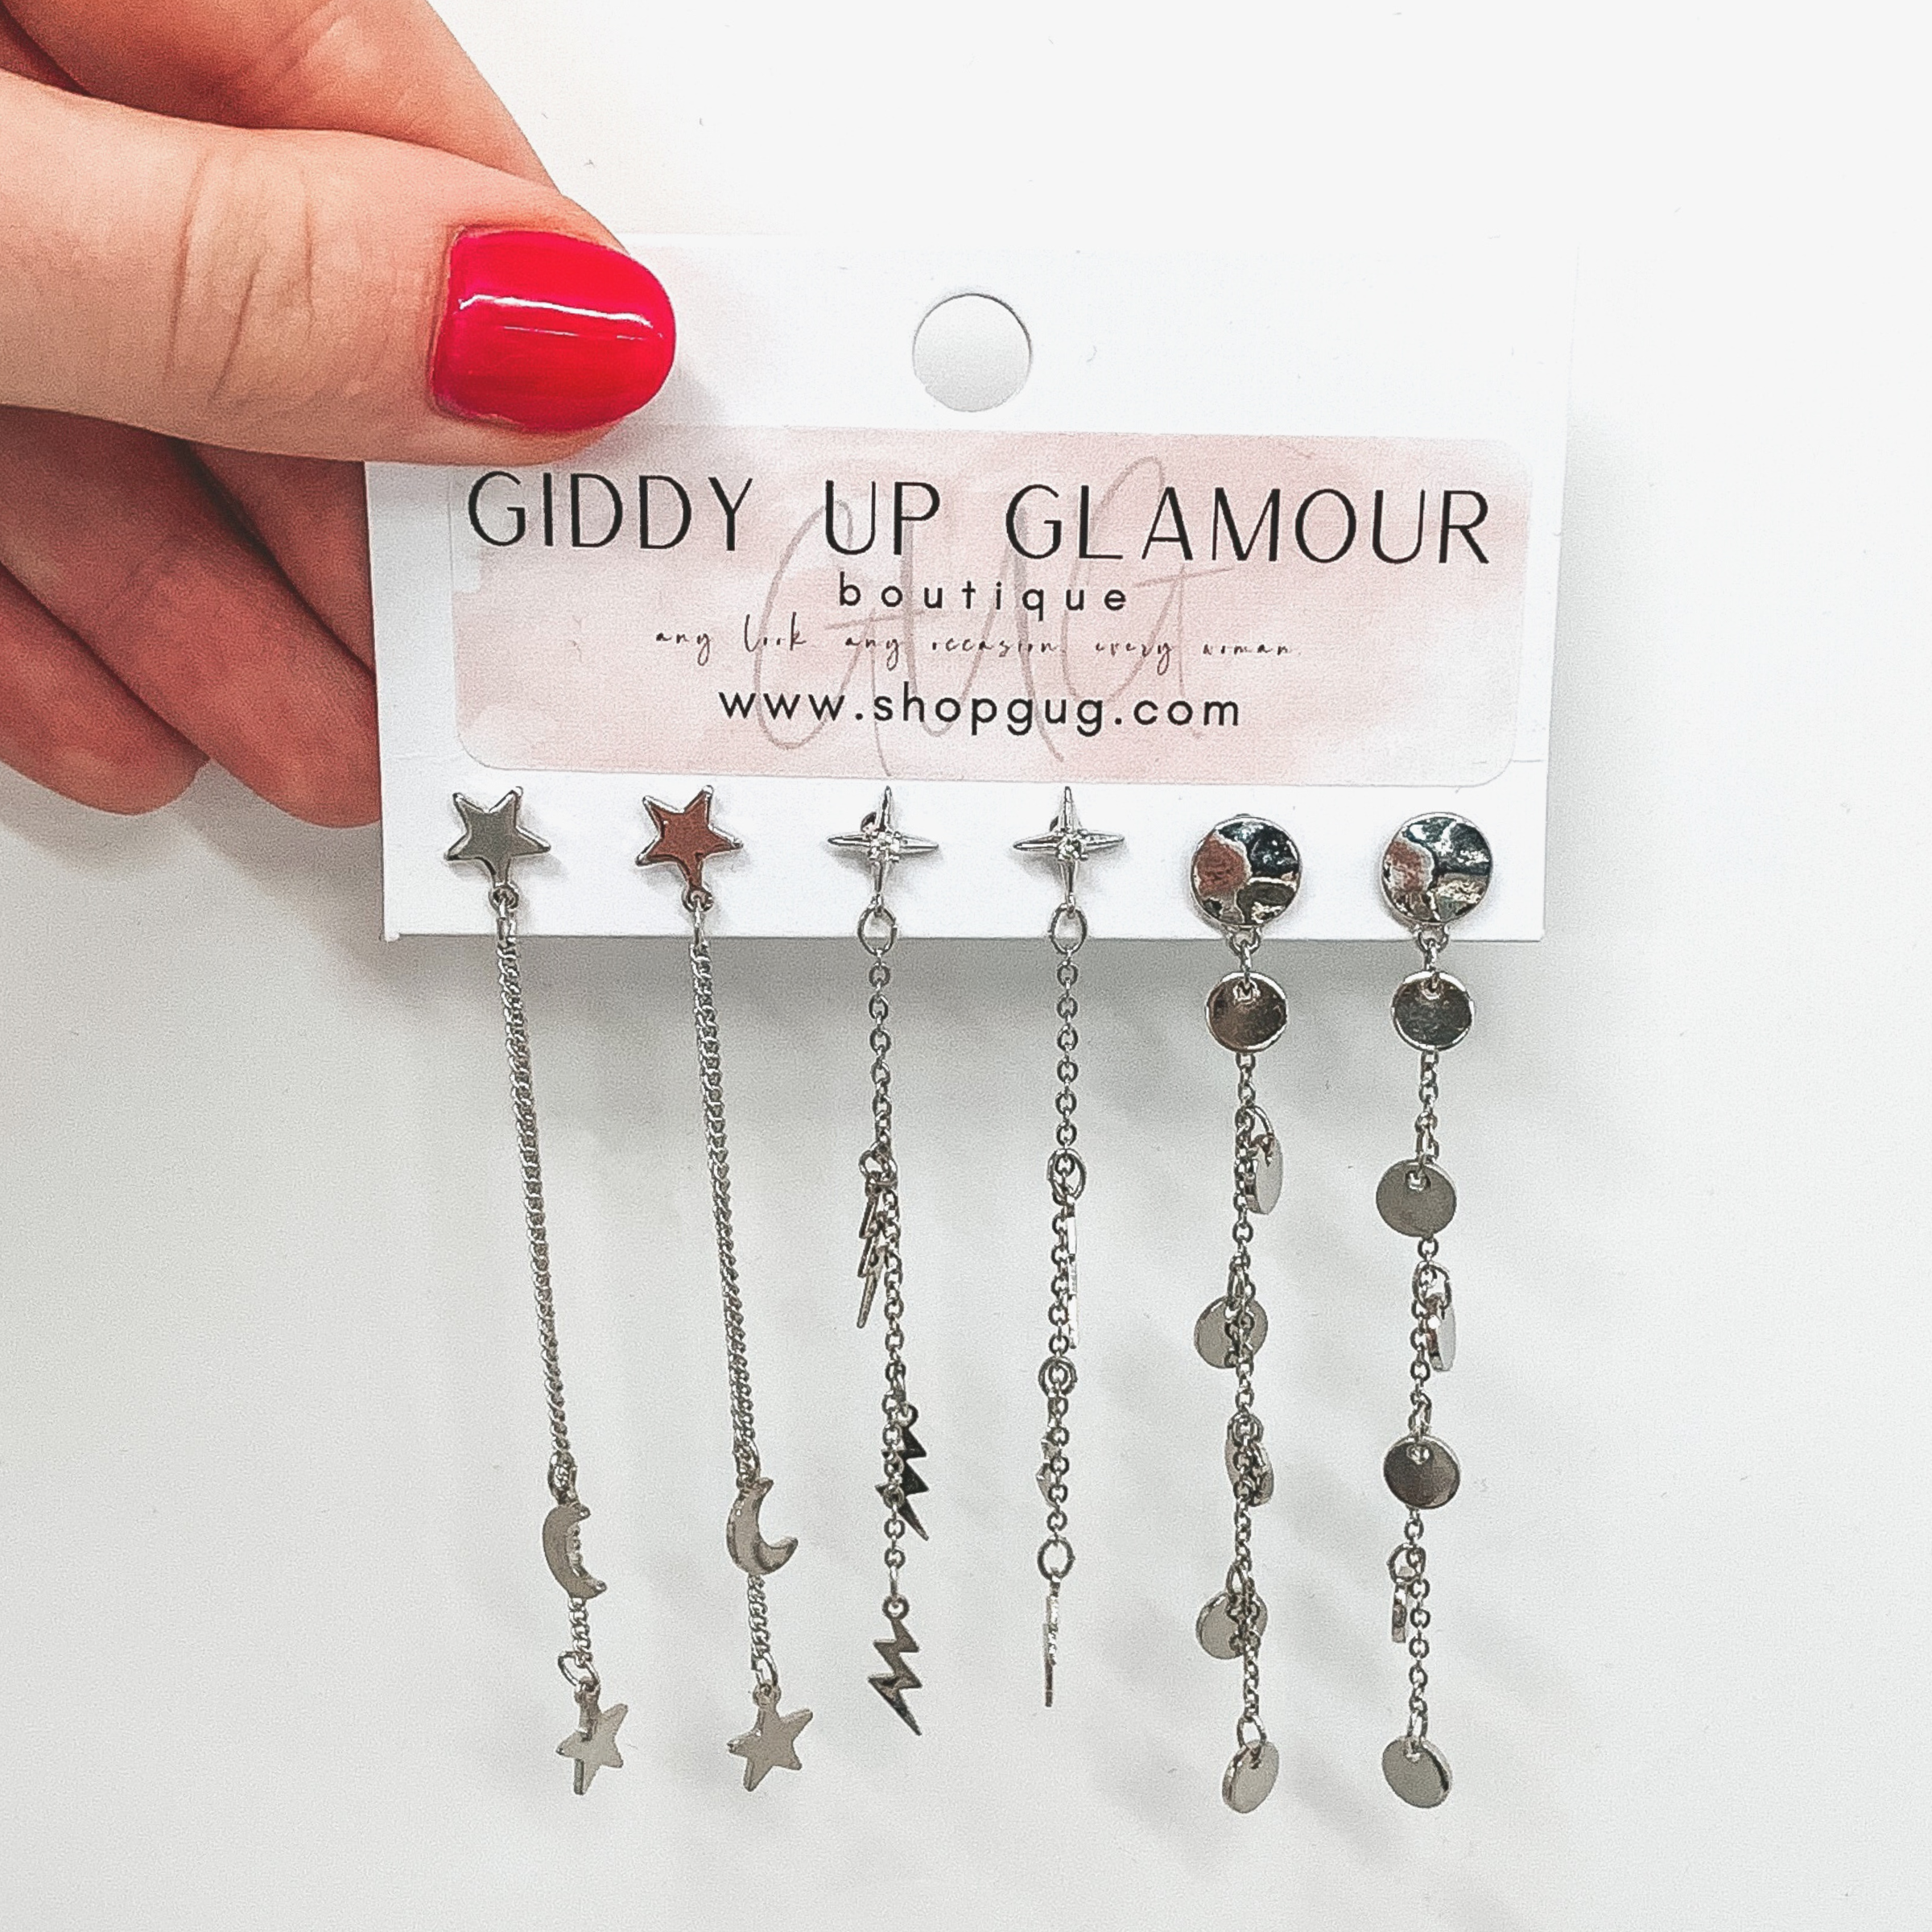 Head in the Clouds Dangle Earring Set in Silver - Giddy Up Glamour Boutique